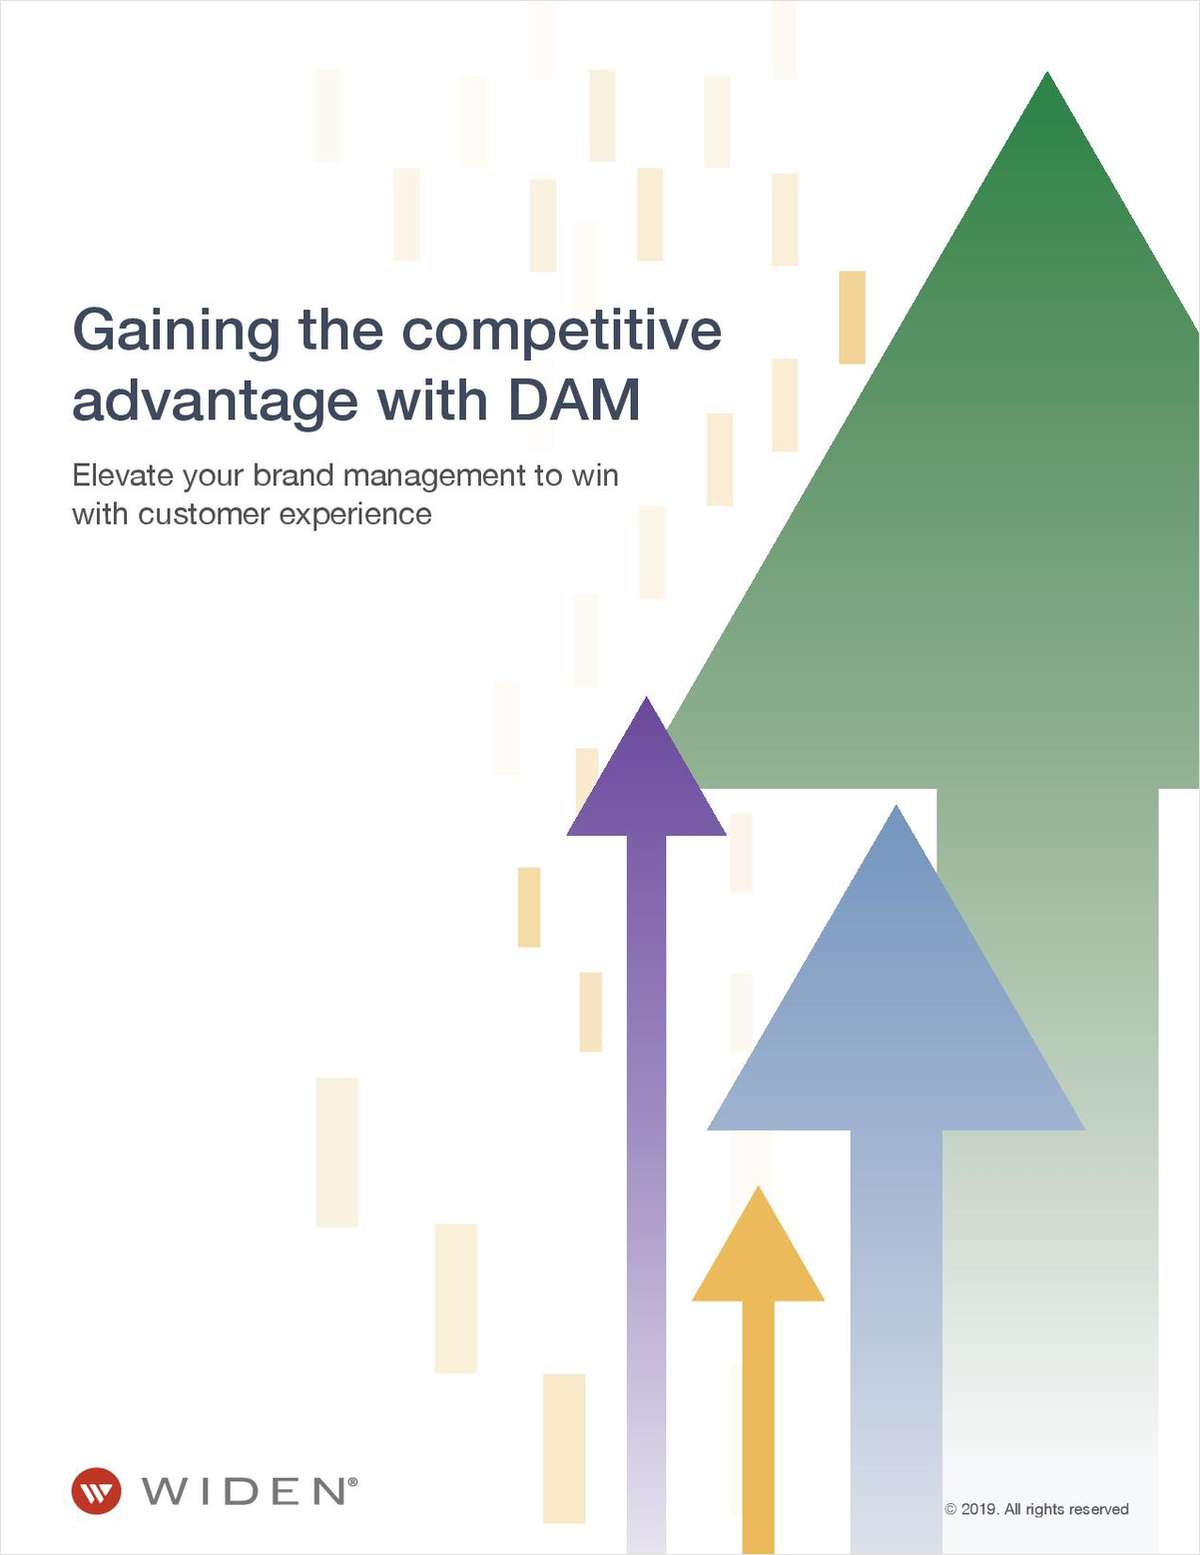 Gaining the Competitive Advantage with DAM